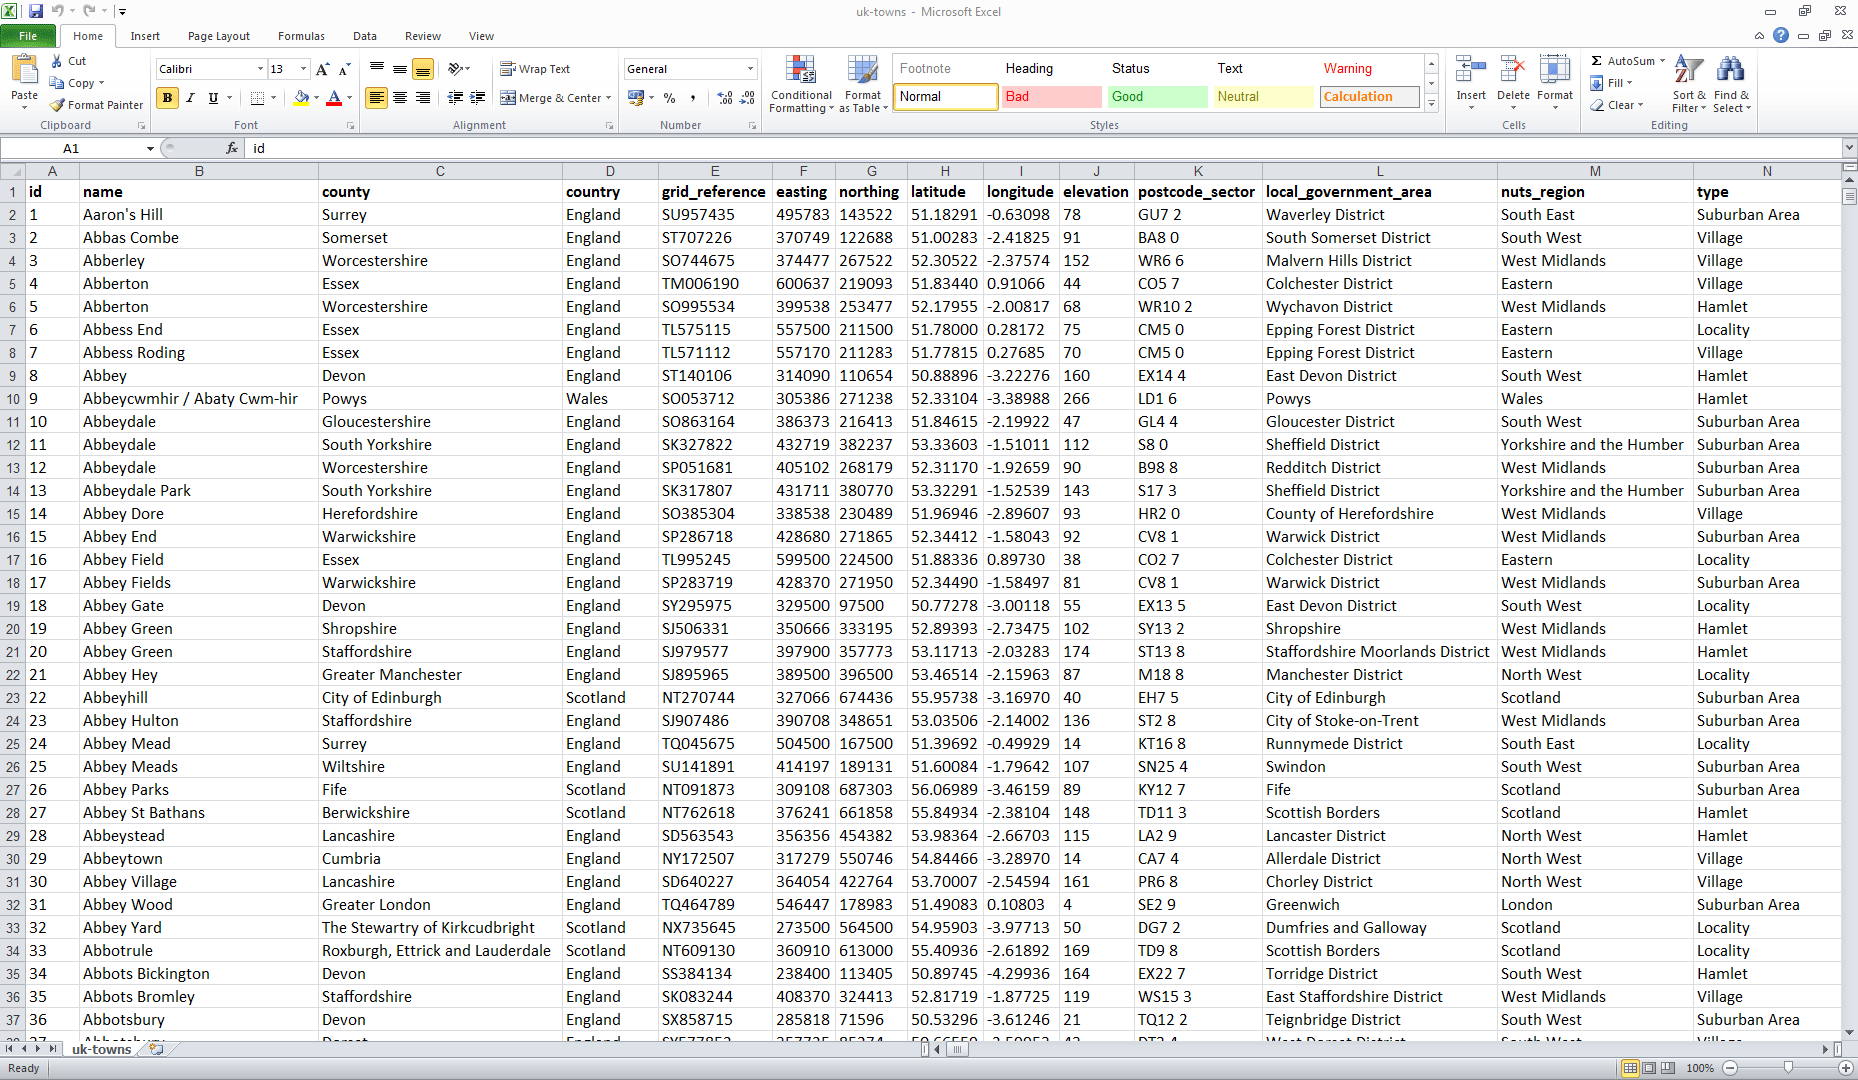 The UK Towns List in Excel format